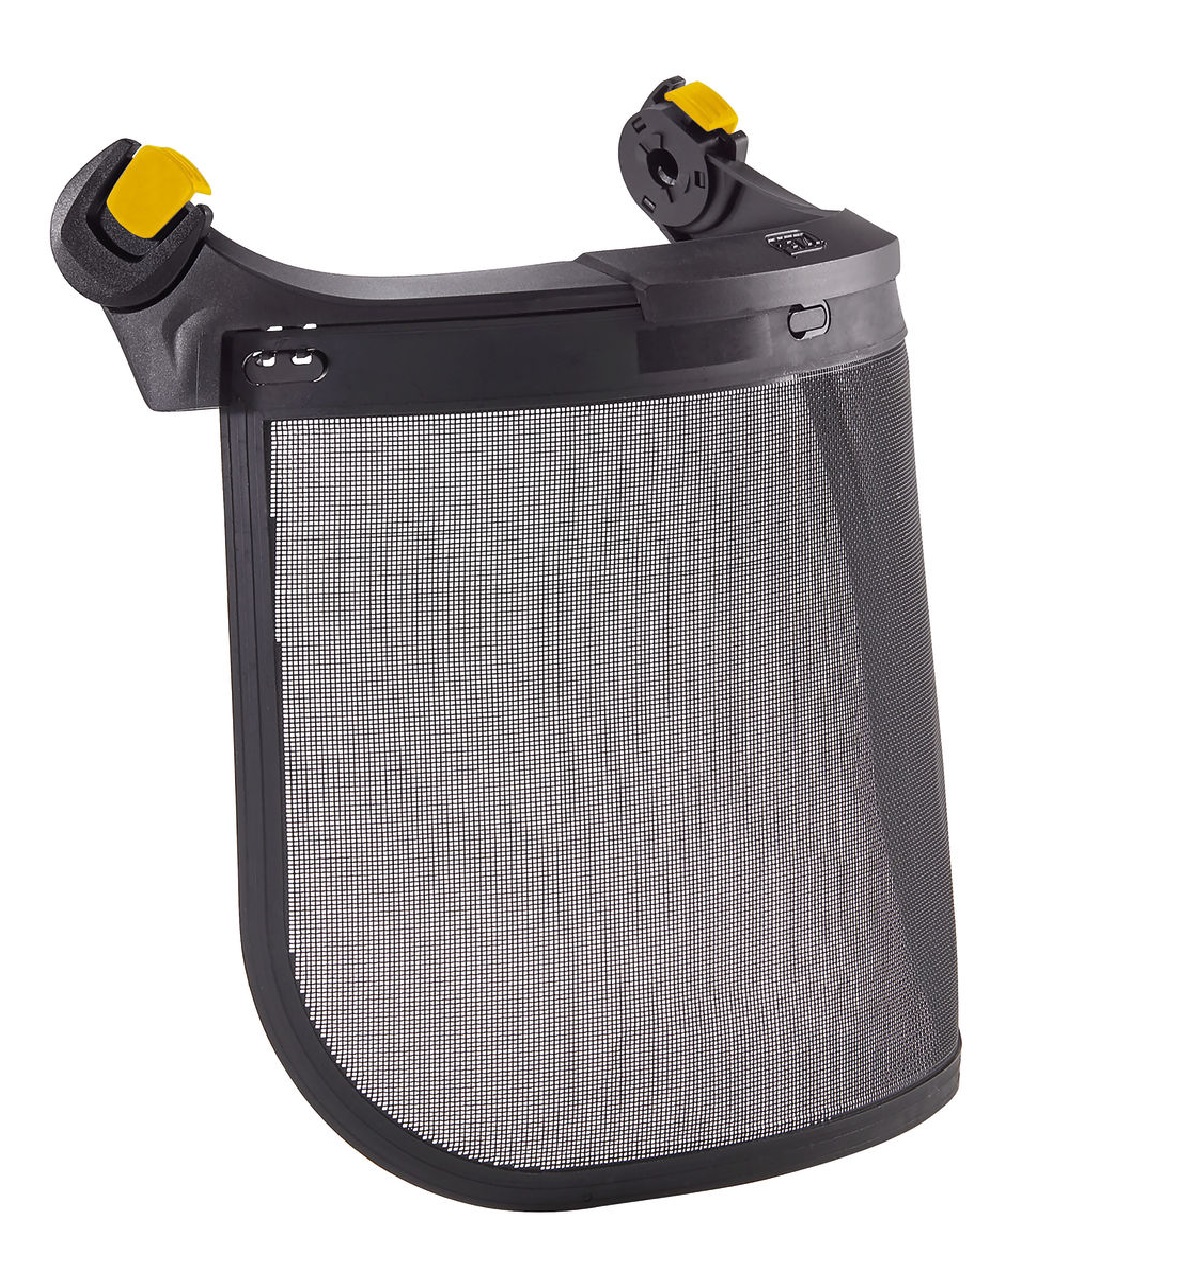 Petzl Professional VIZEN MESH Face Shield For Tree Care For VERTEX And STRATO Helmets With EASYCLIP System